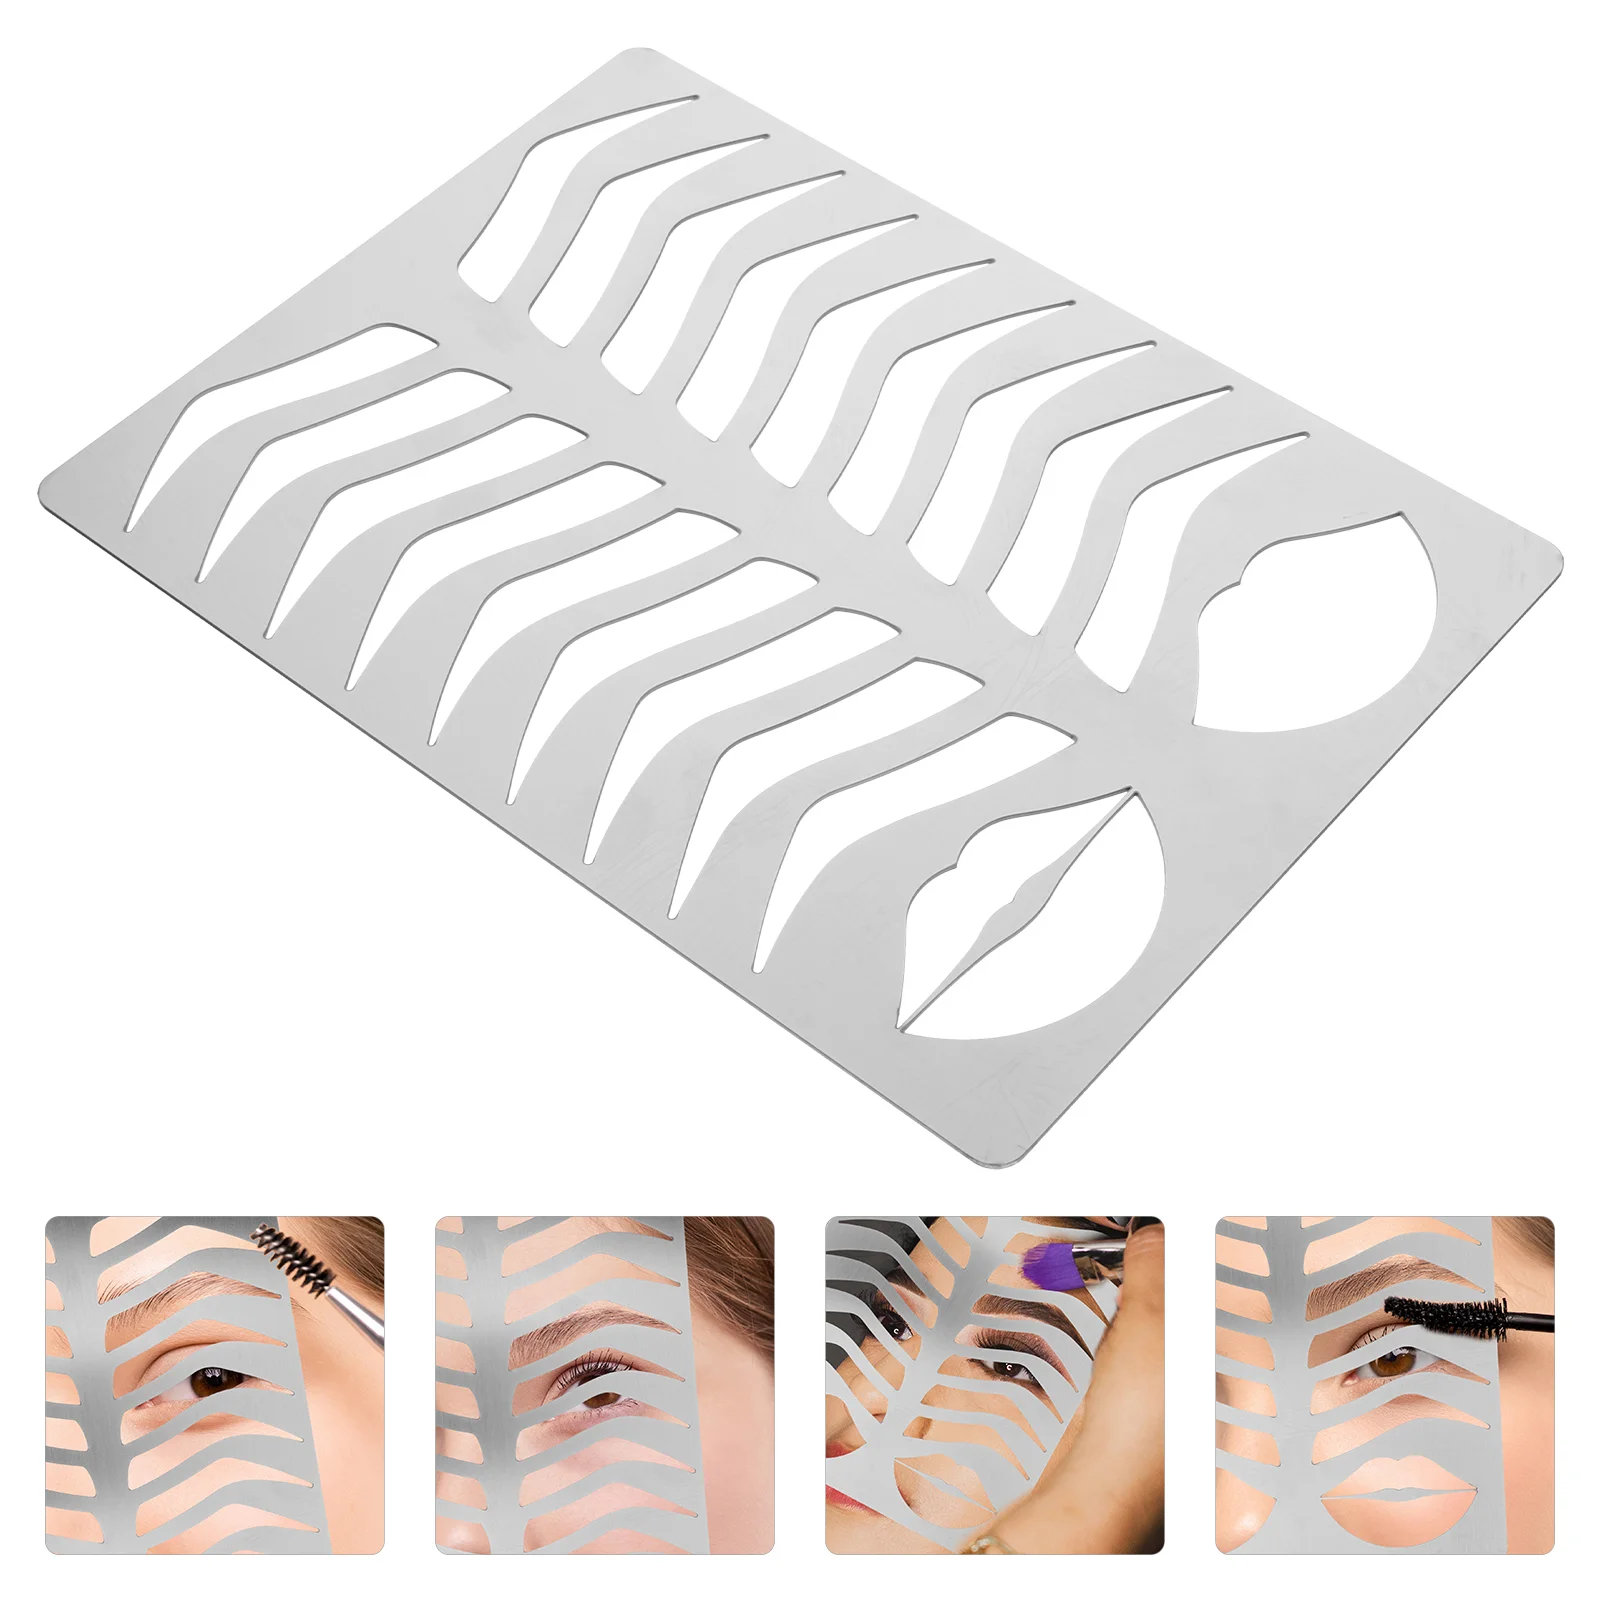 

Eyebrow Drawing Mold Practice Stencil Lip Makeup Accessory Template Shaping Tool